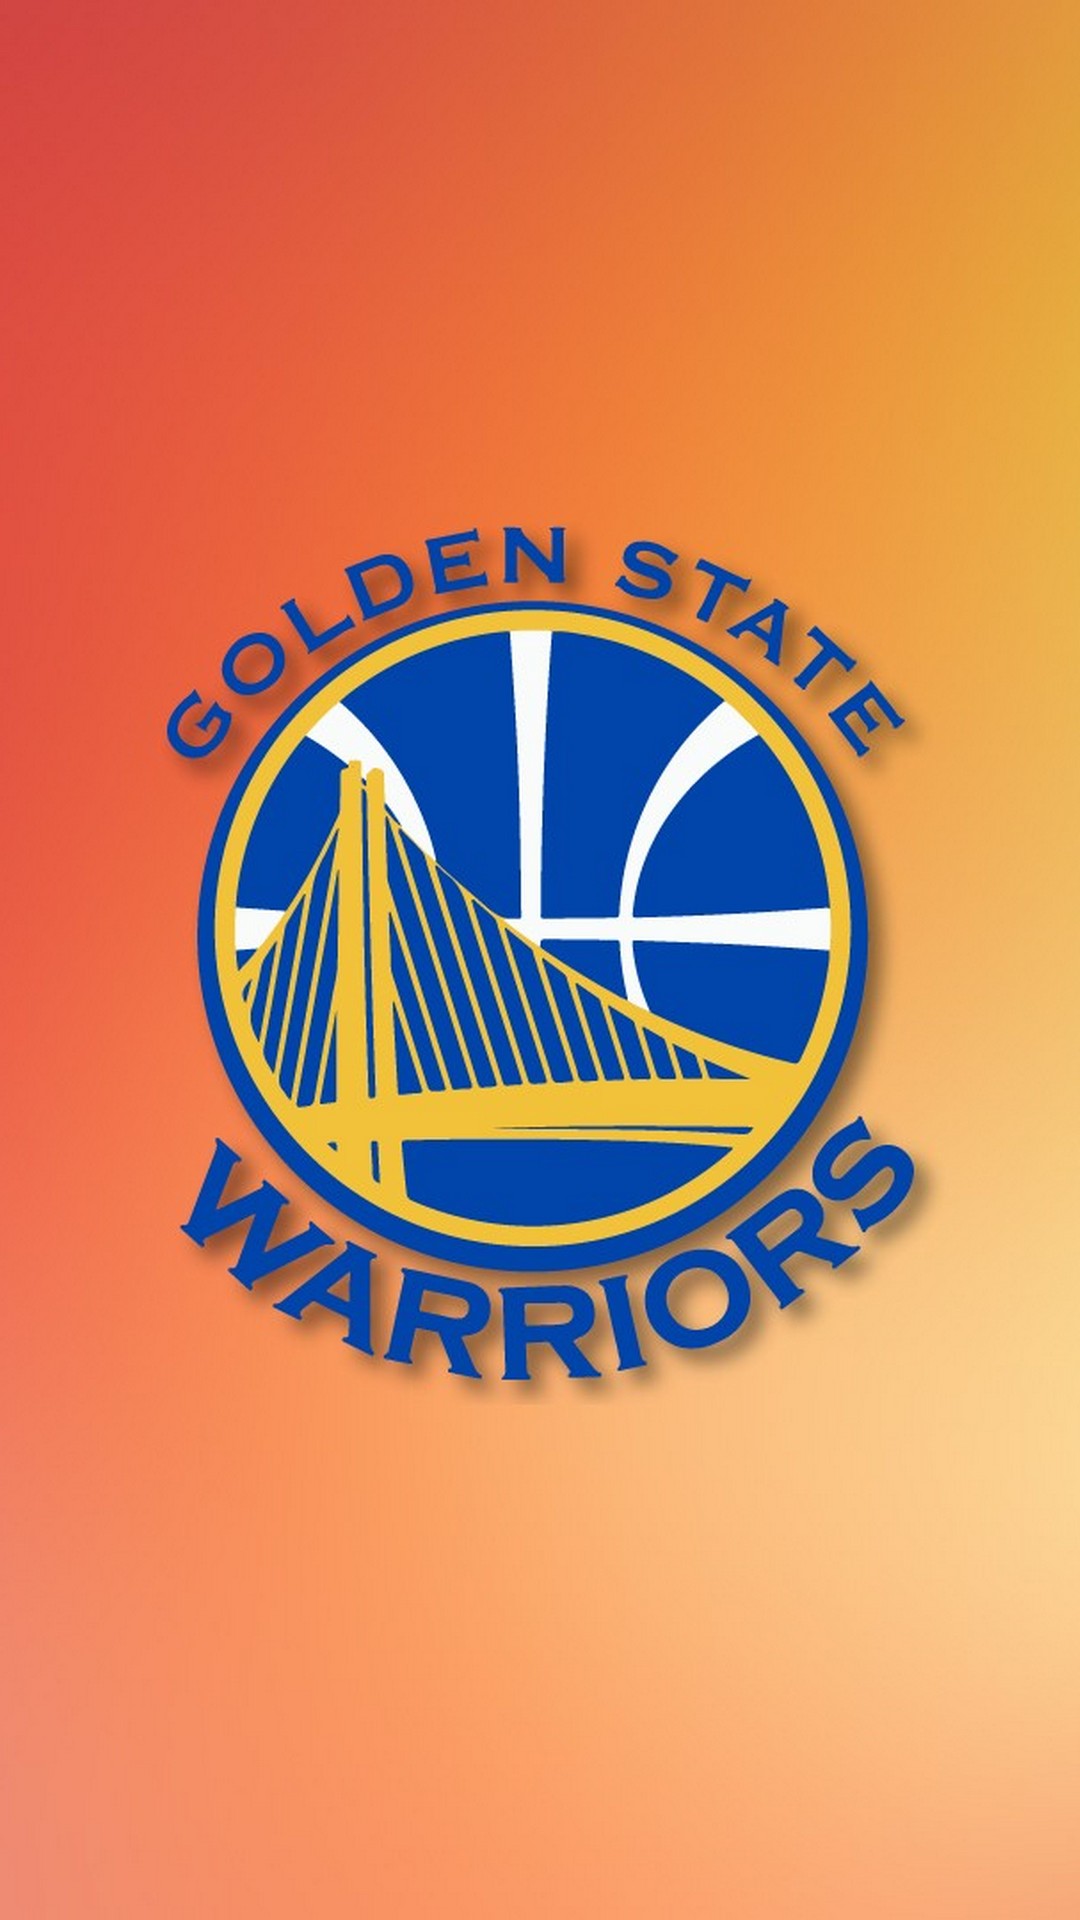 Golden State Warriors Mobile Wallpaper HD With Resolution 1080X1920 pixel. You can make this wallpaper for your Desktop Computer Backgrounds, Mac Wallpapers, Android Lock screen or iPhone Screensavers